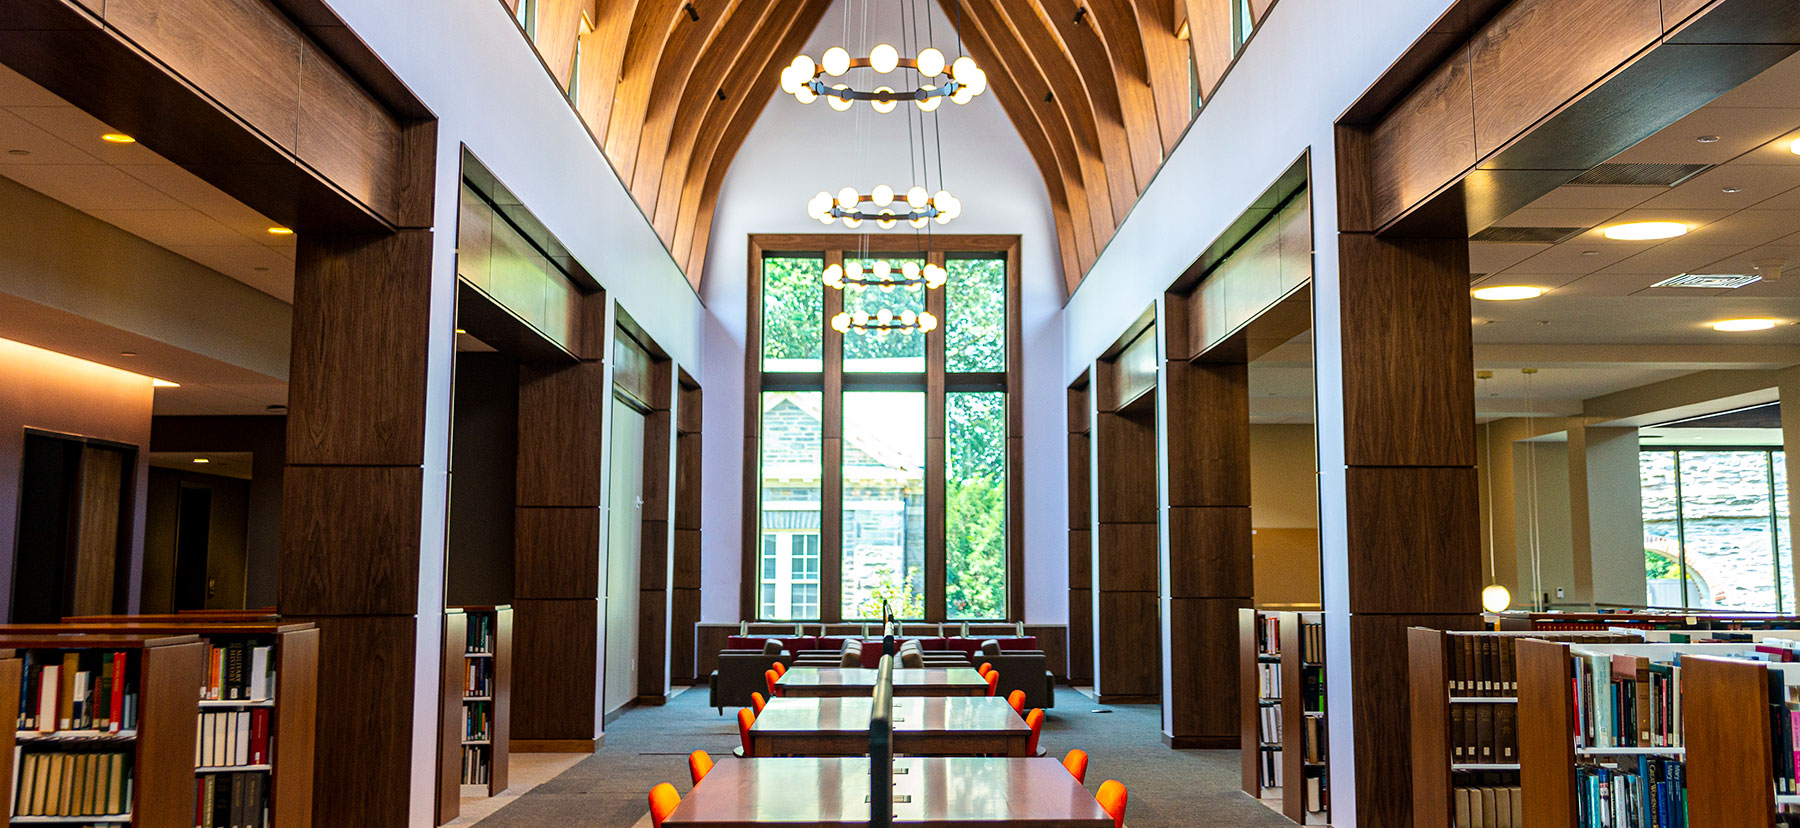 The soaring ceilings and light-filled rooms of Lutnick Library